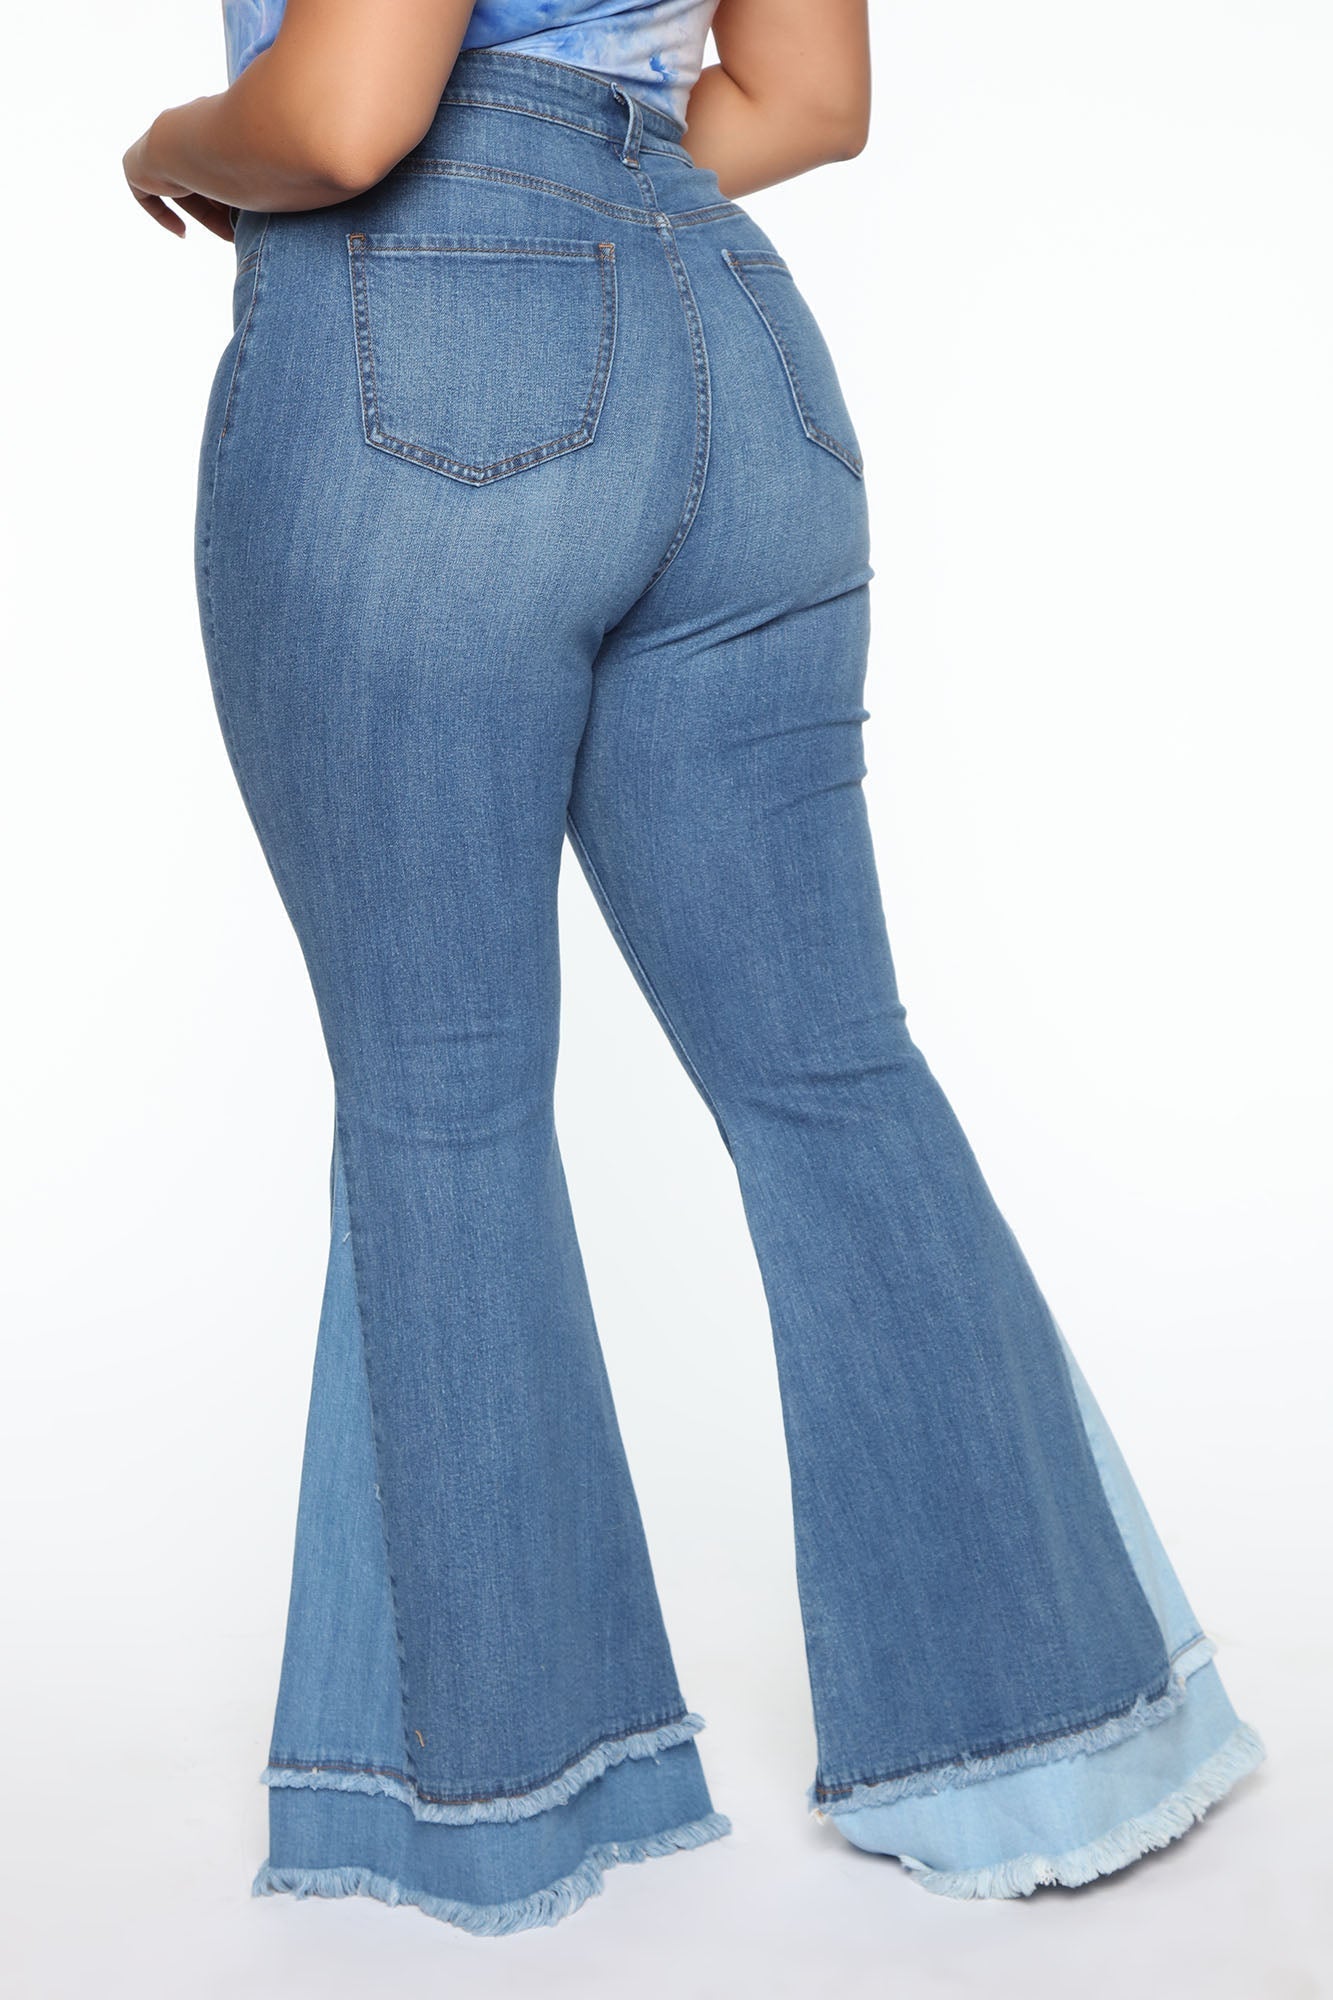 Only The Best Vibes Bell Bottom Jeans - Medium Blue Wash Sai Feel